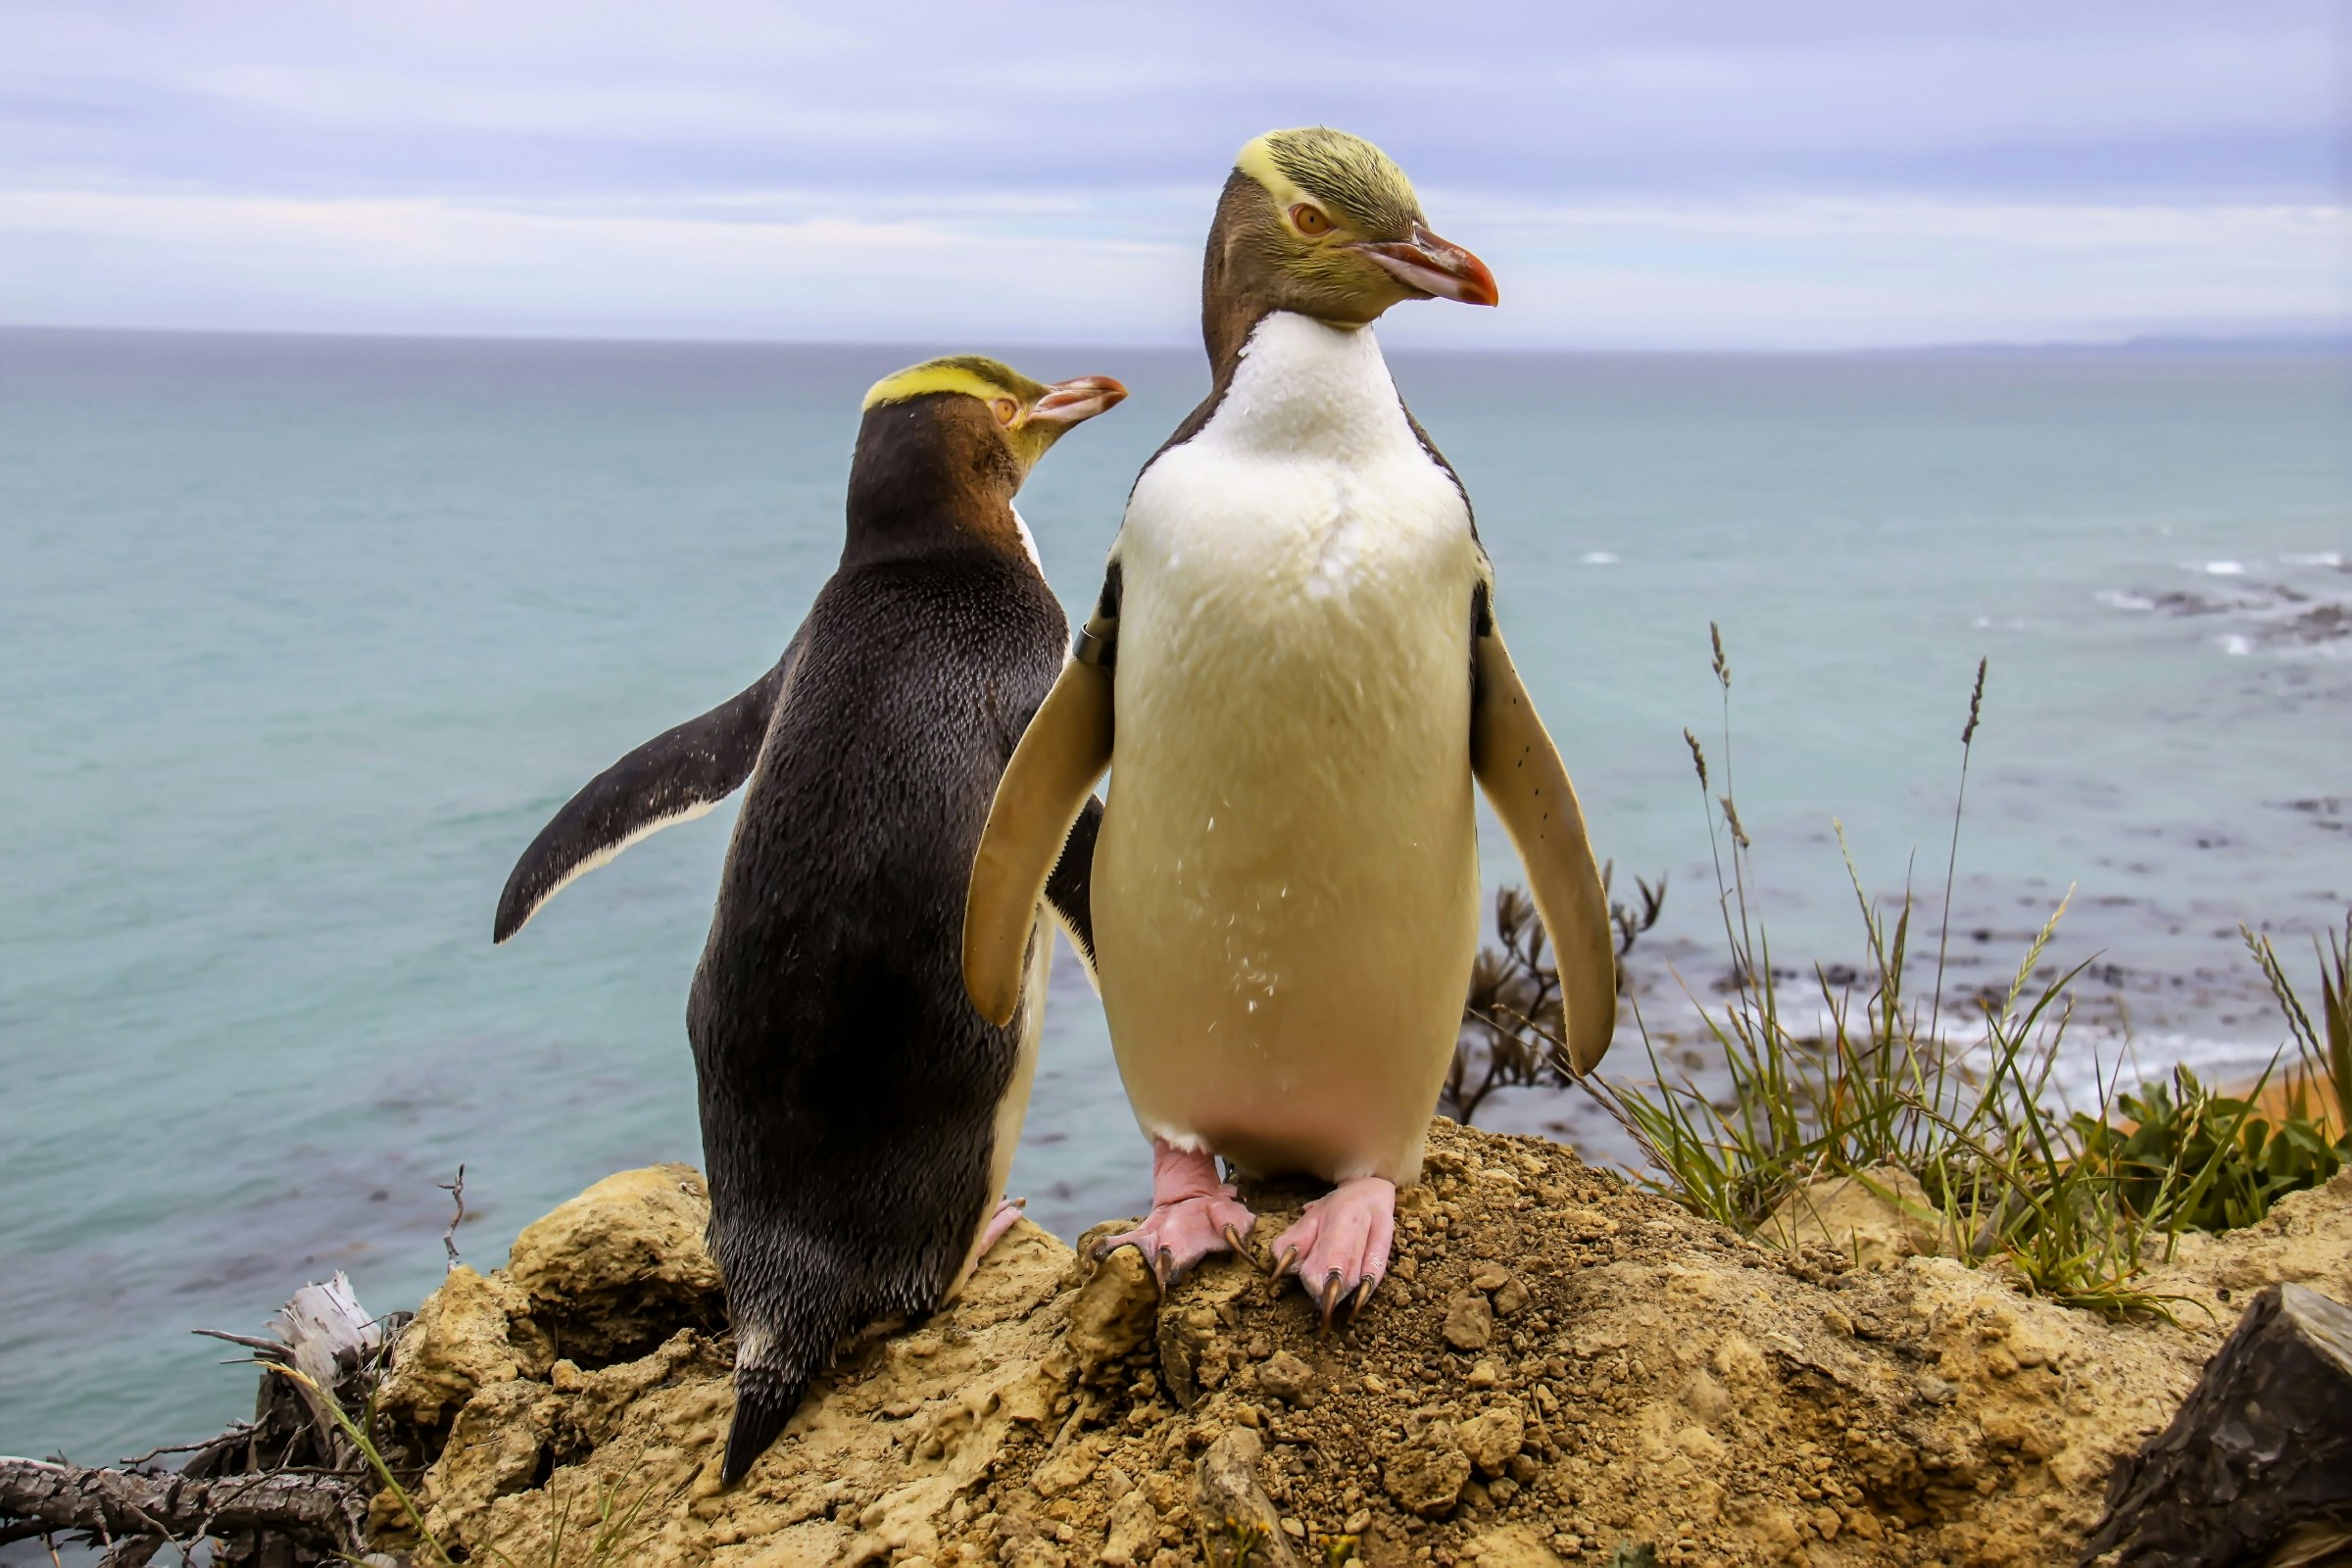 Two penguins, one facing the camera and one looking away, on a cliff overlooking the water on the Otago Peninsula